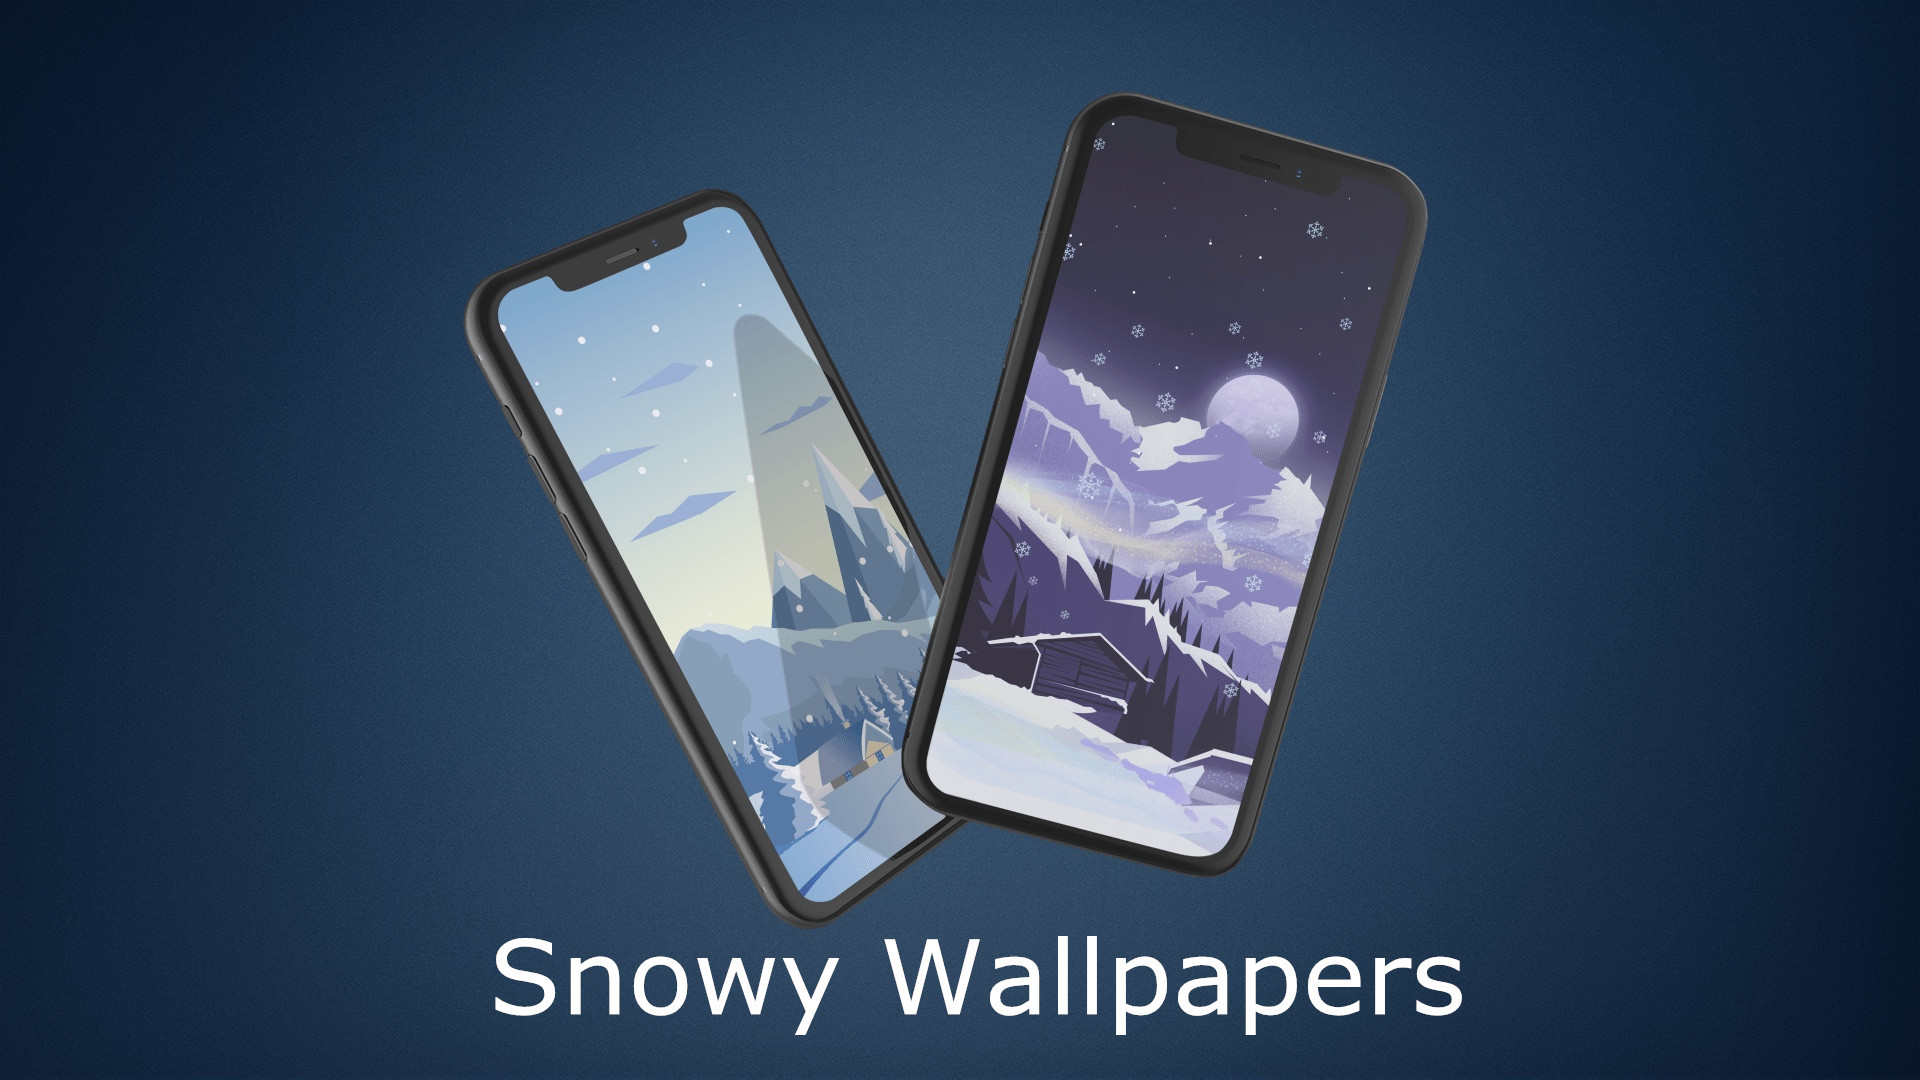 1920x1080 Snowy Wallpaper Illustrations for iPhone